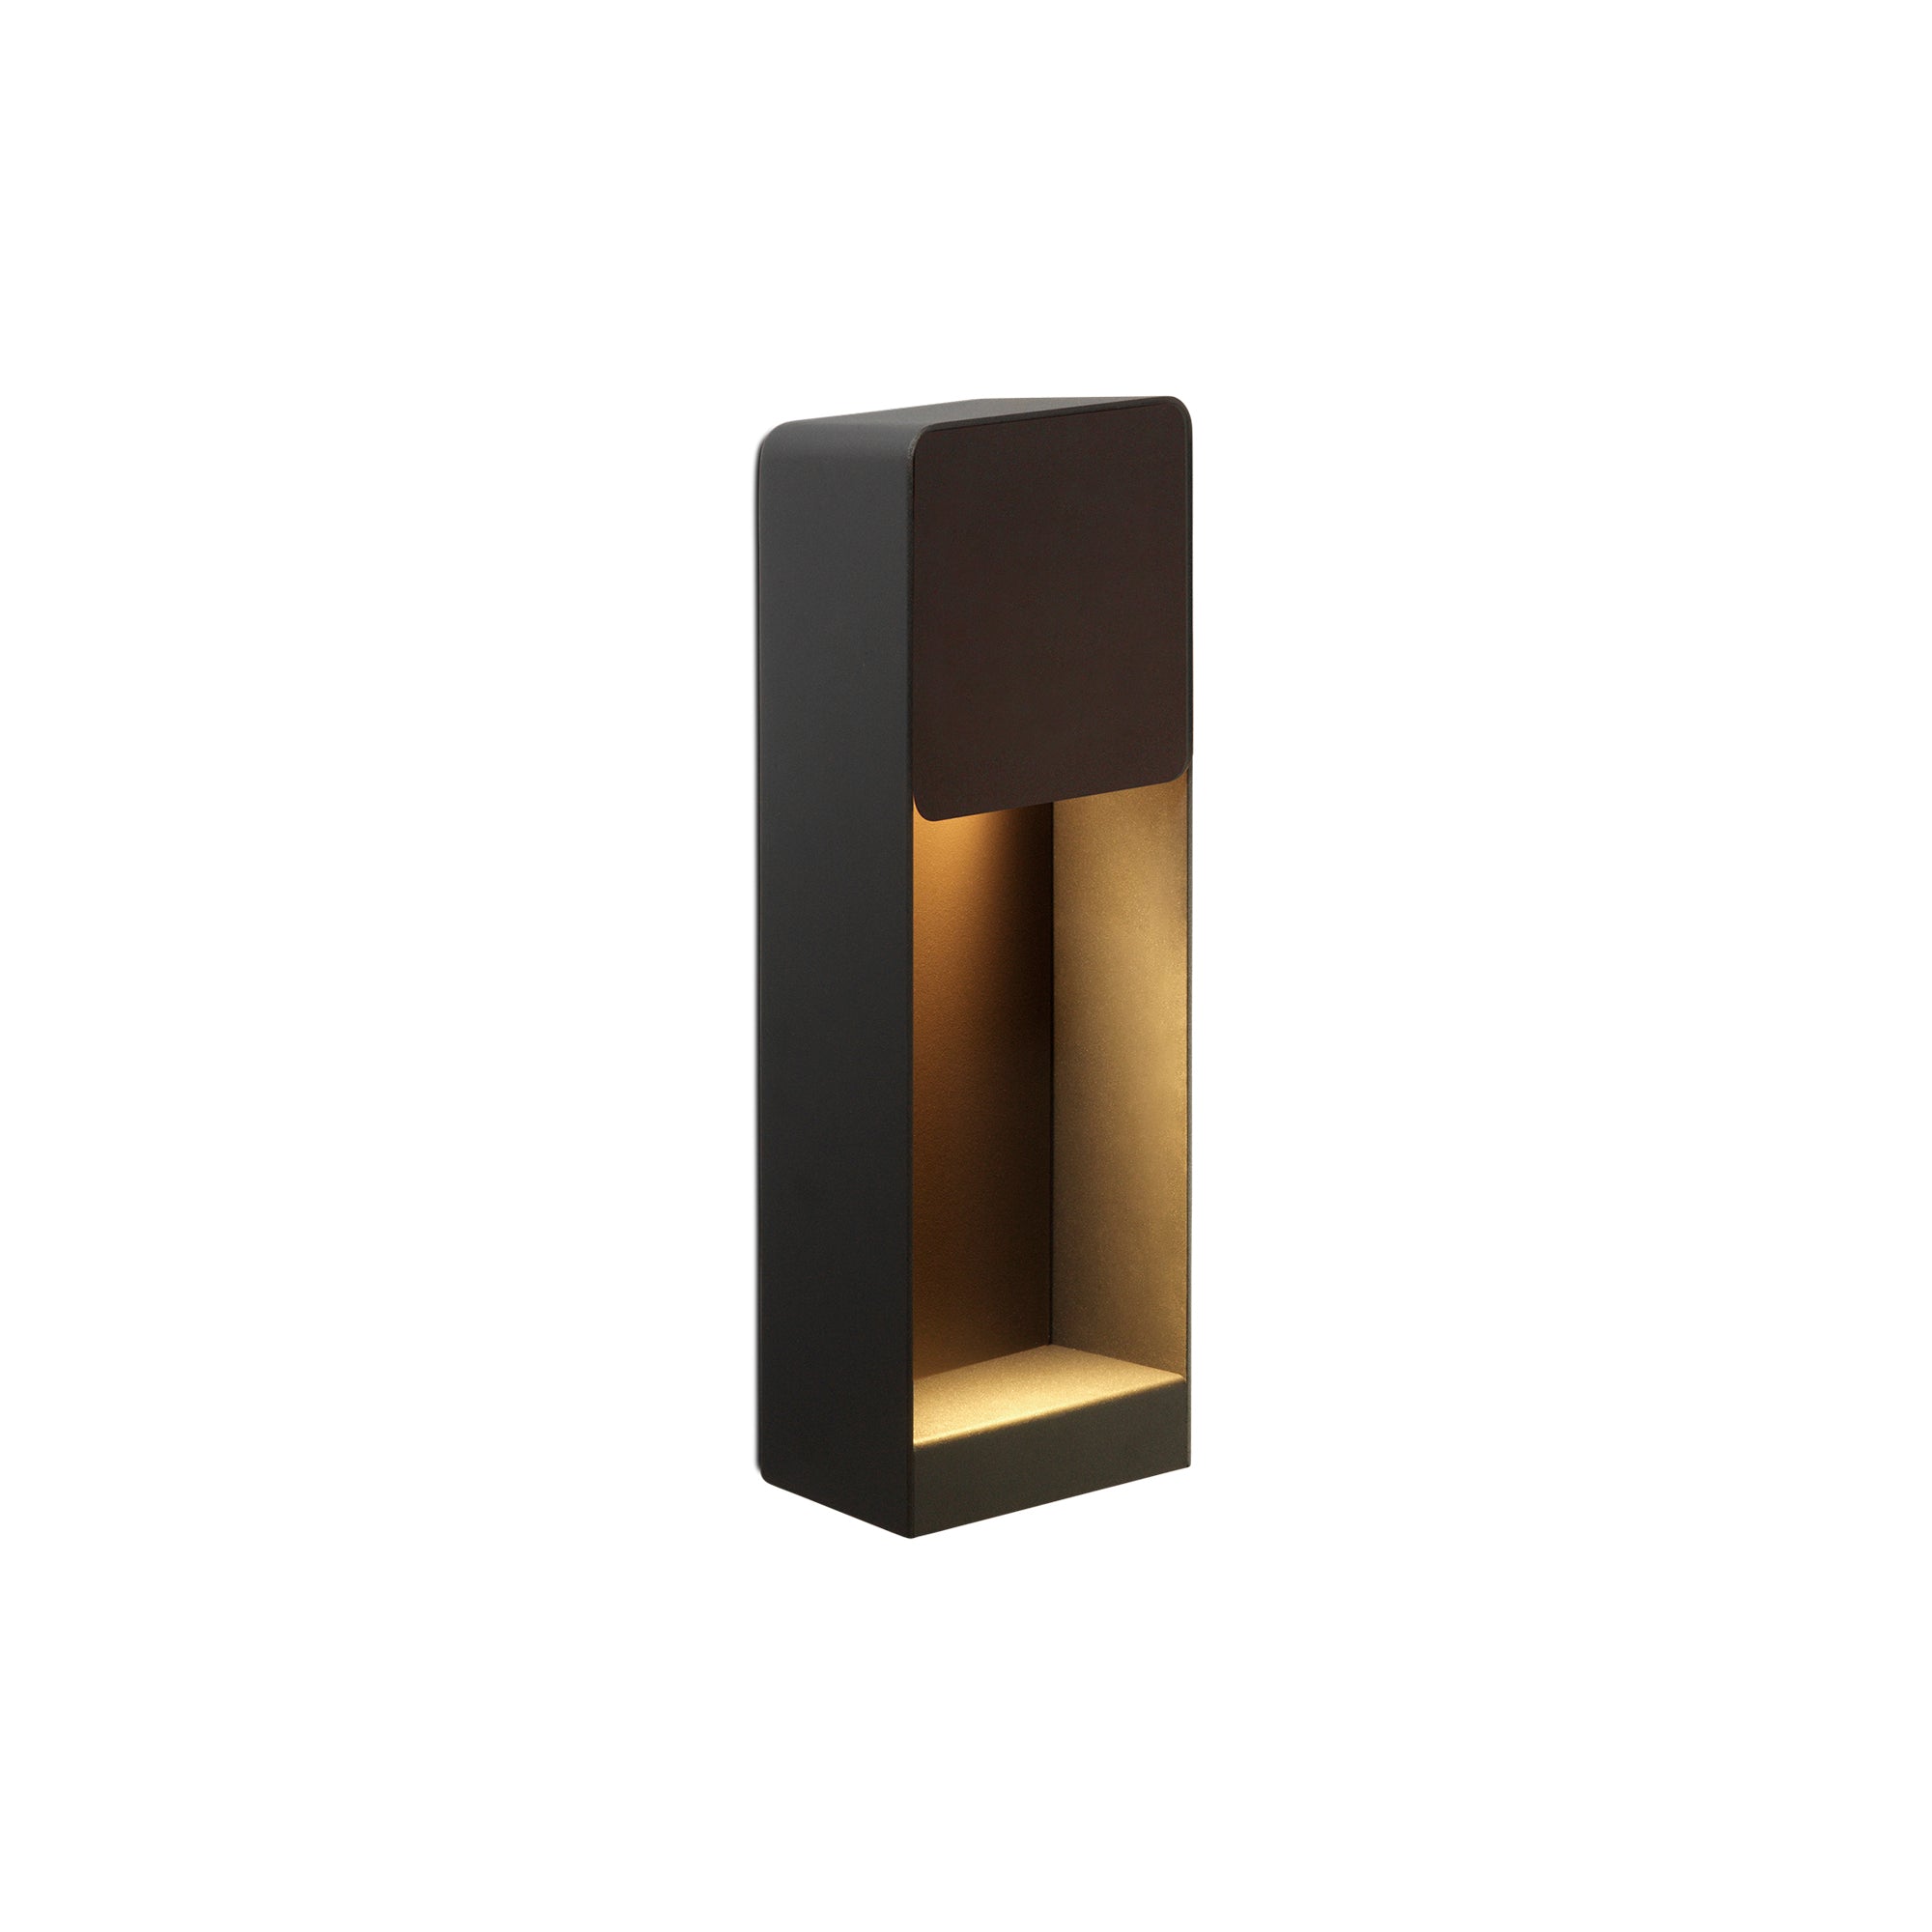 Lab A Outdoor Wall Lamp: Brown